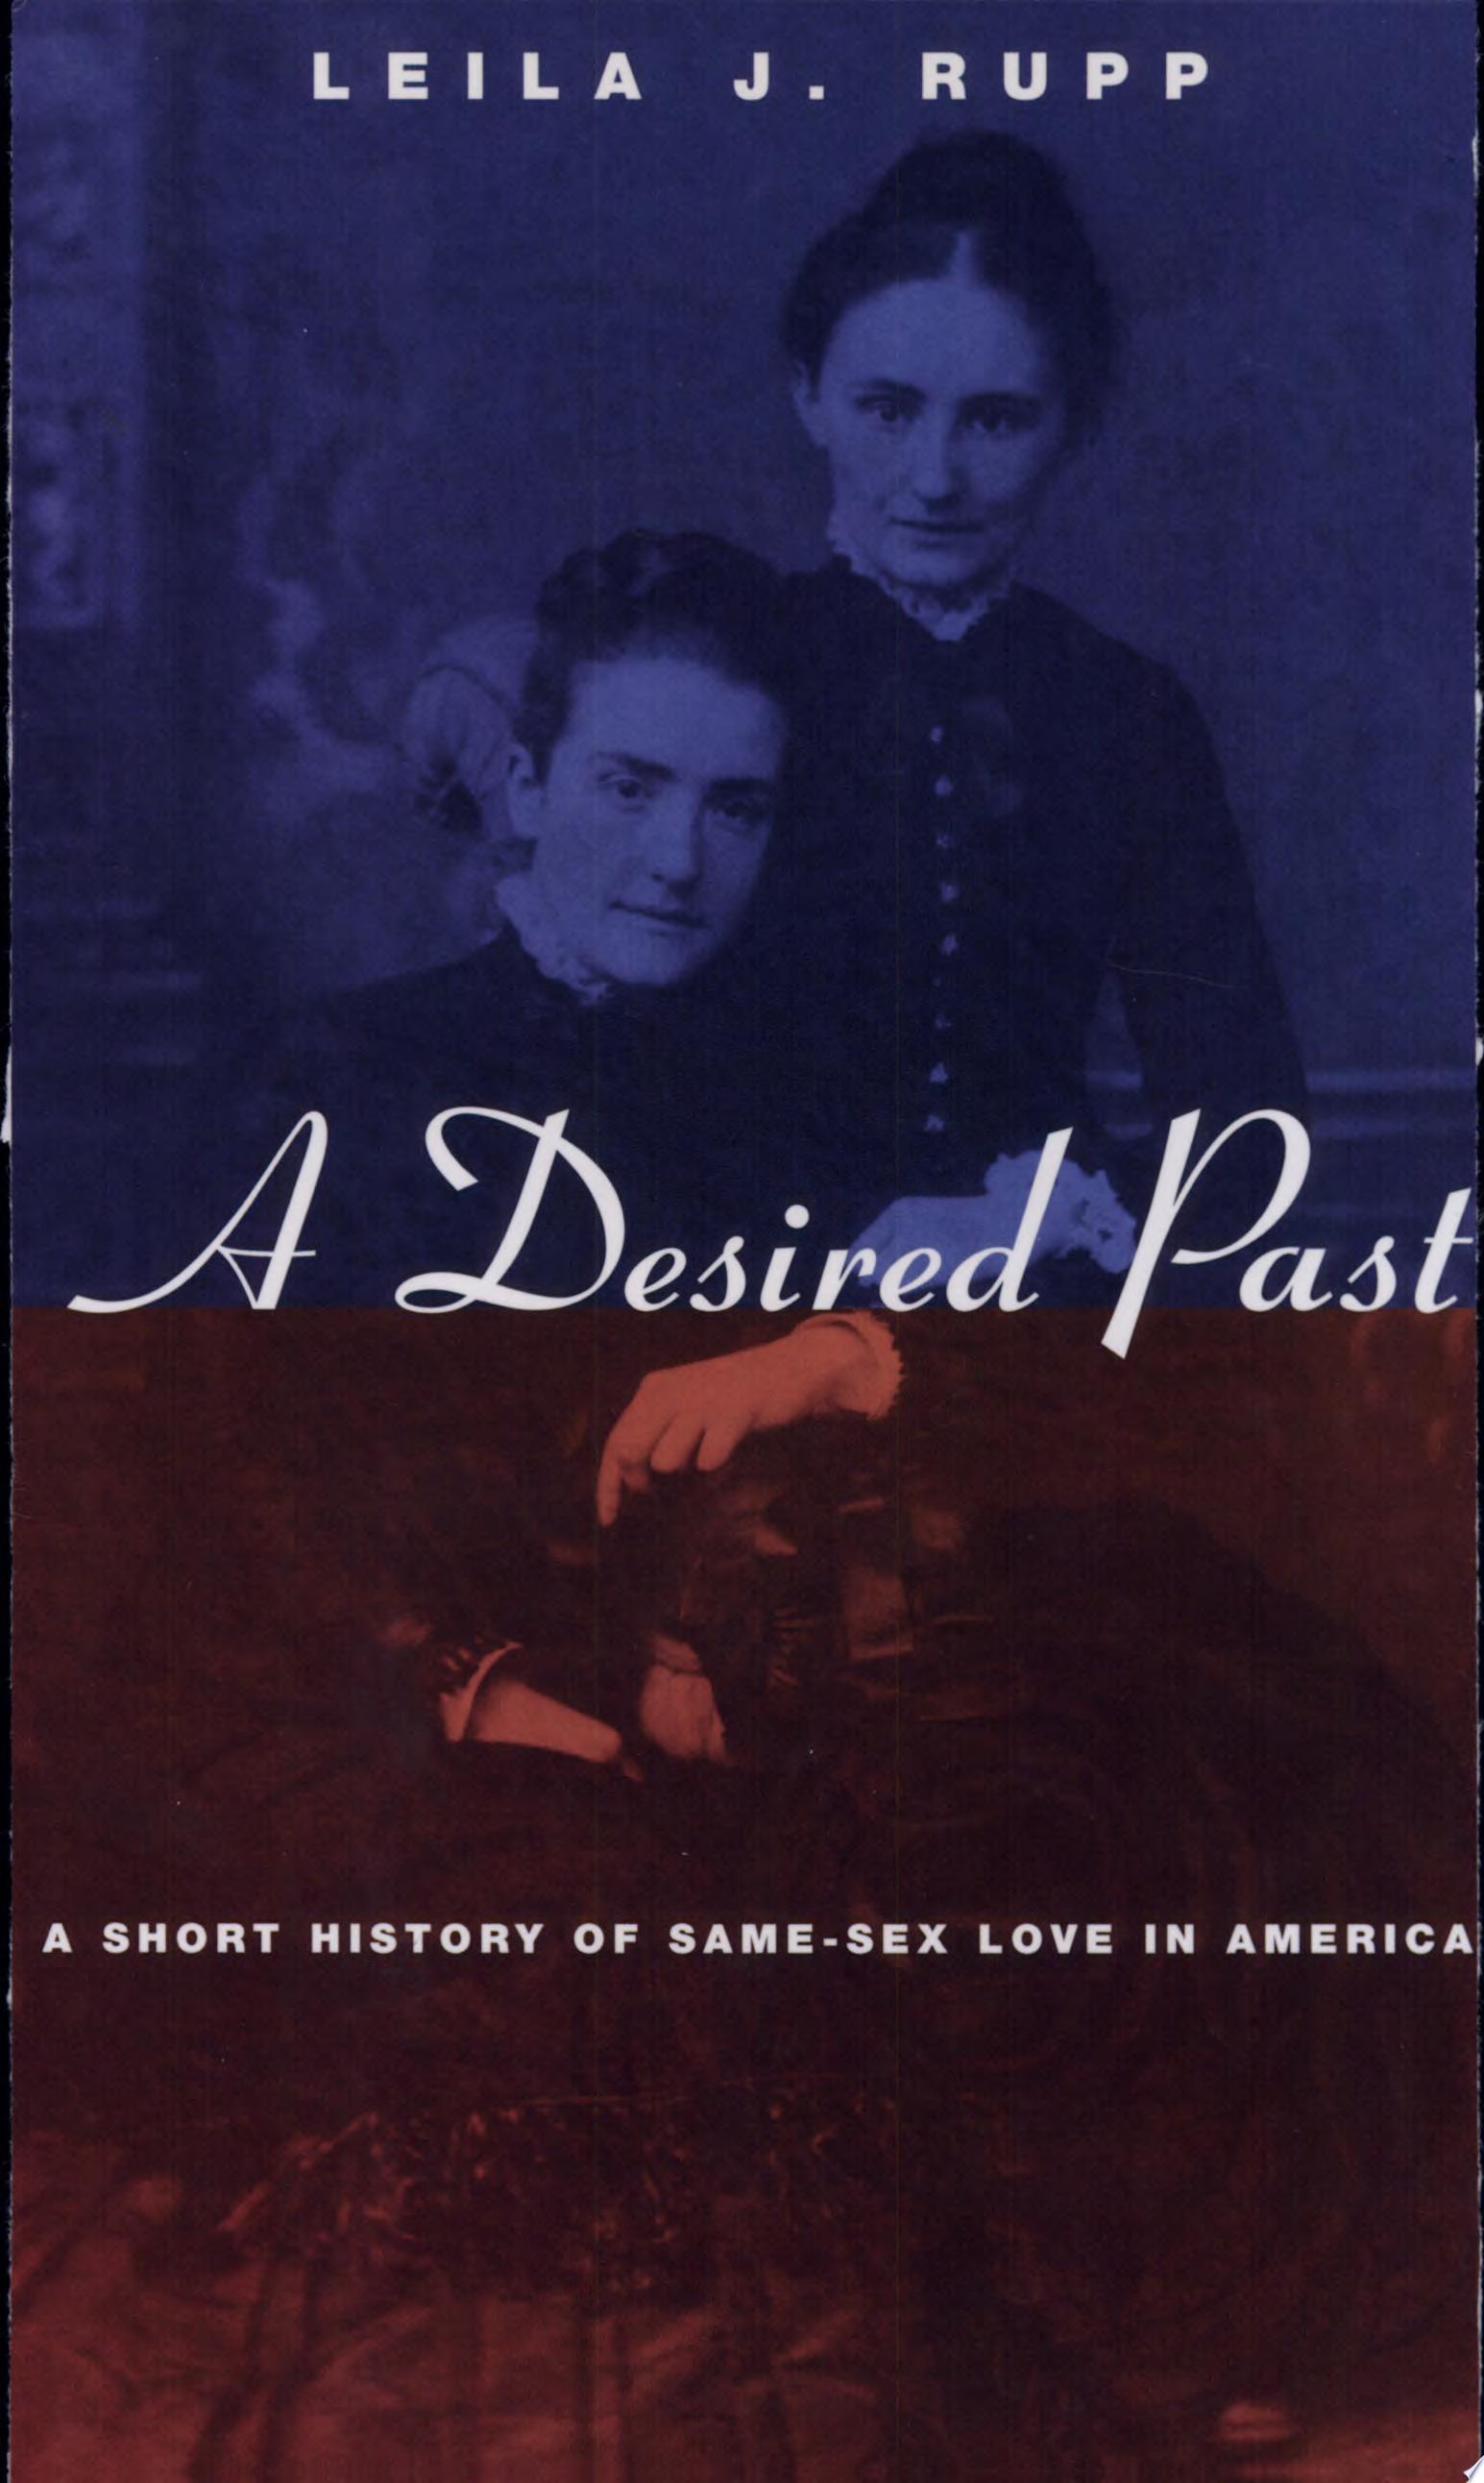 Image for "A Desired Past: a short history of same-sex love in America"